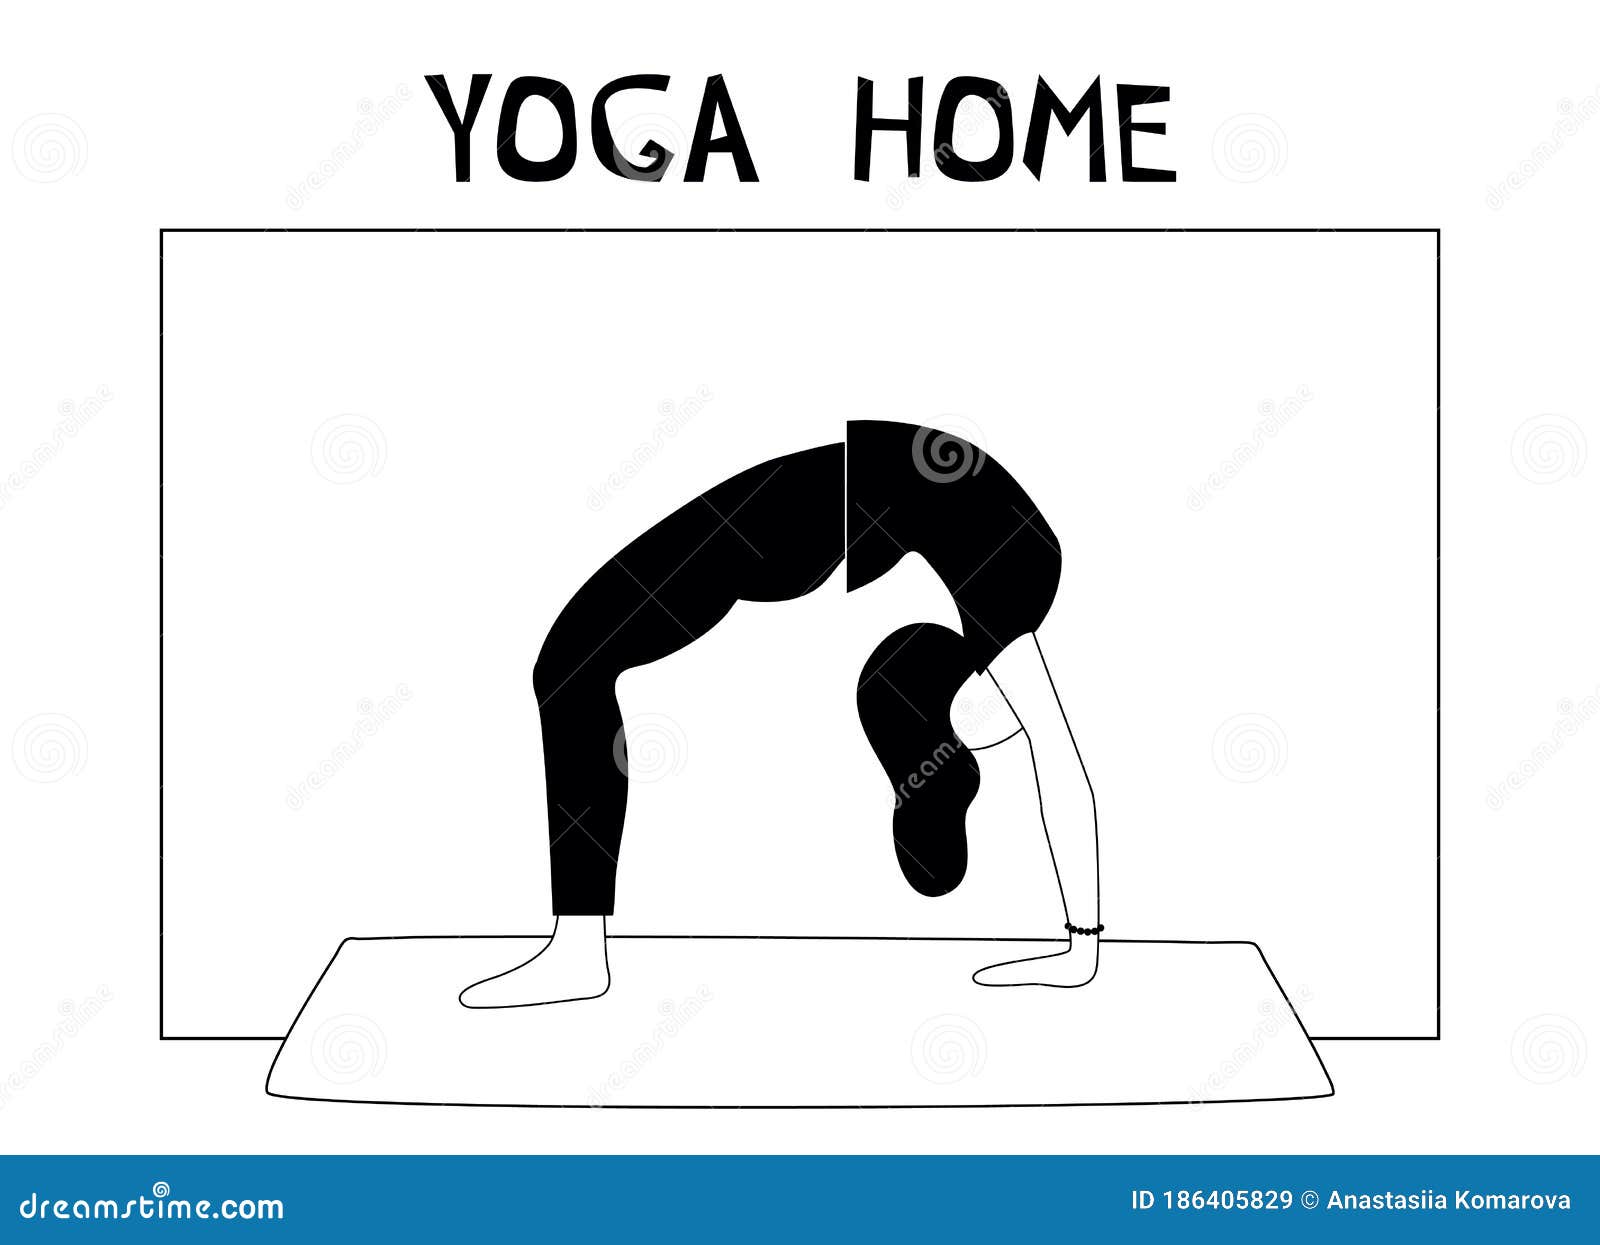 Class Chakrasana: Over 35 Royalty-Free Licensable Stock Illustrations &  Drawings | Shutterstock